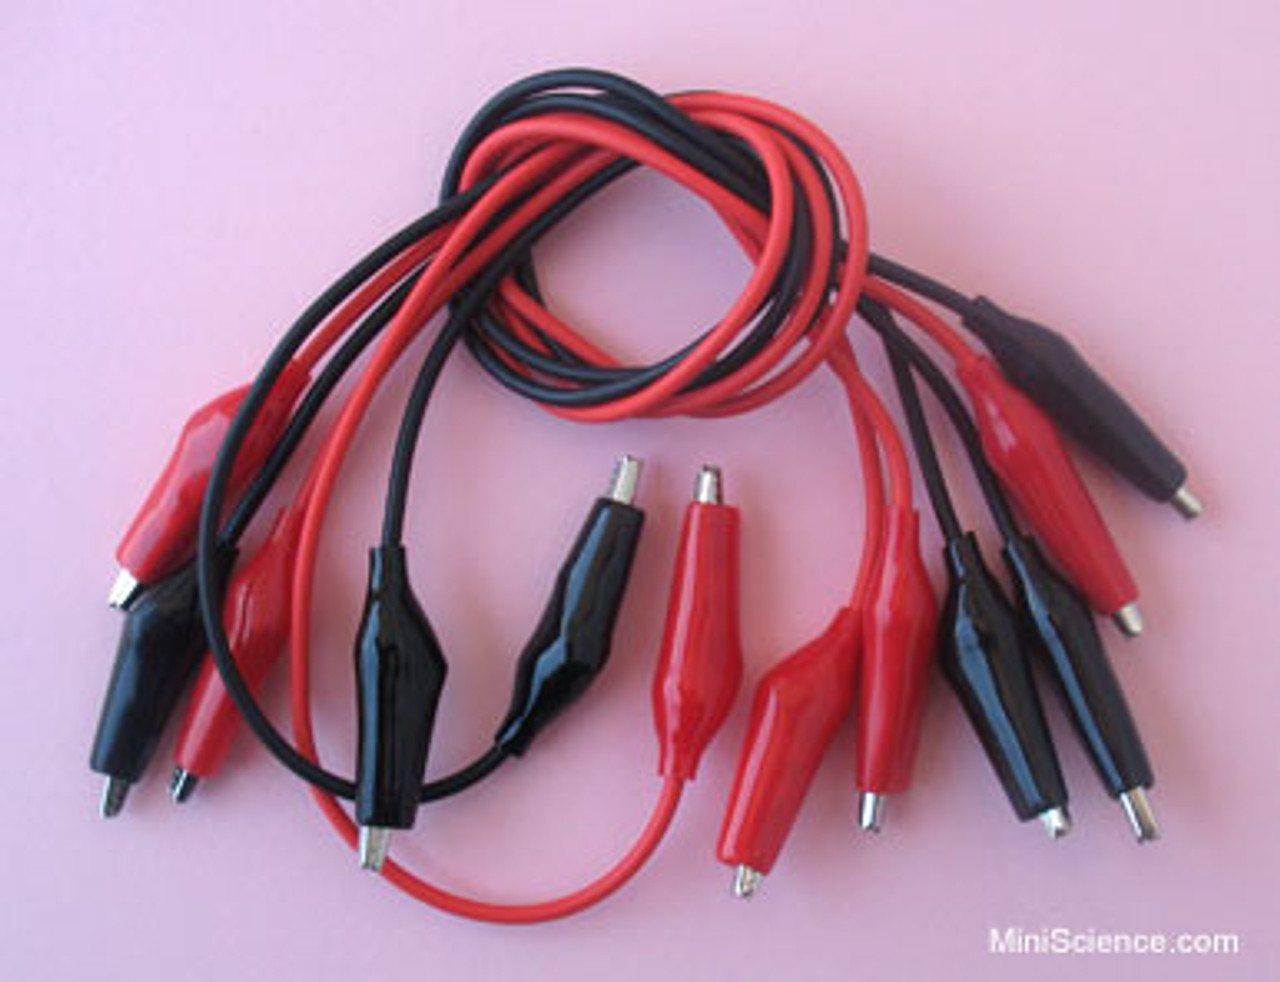 Test lead set, Wires with Alligator Clips, Set of 6